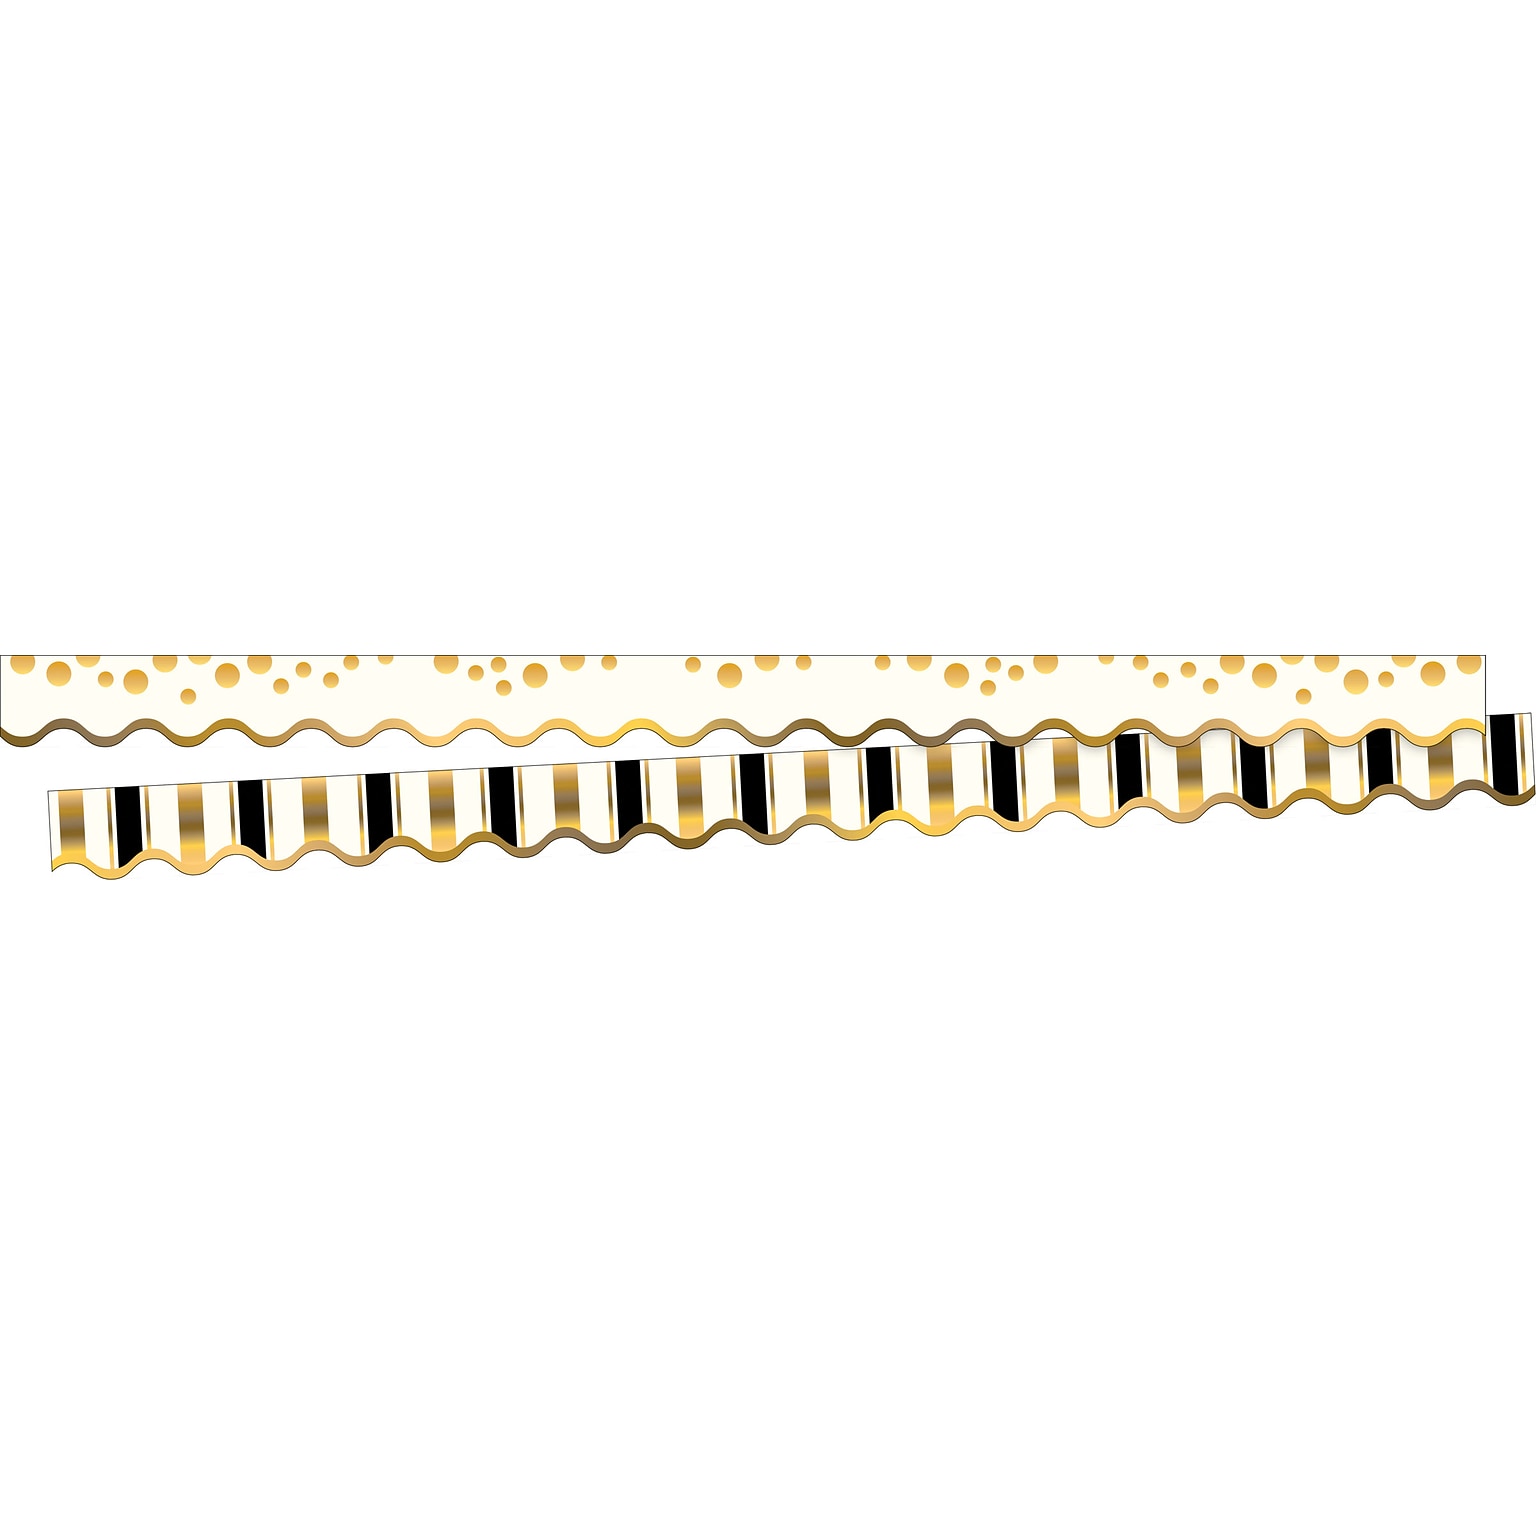 Barker Creek Gold Coins Double-Sided Scalloped Border 2-Pack, 78 Feet/Set (BC3698)